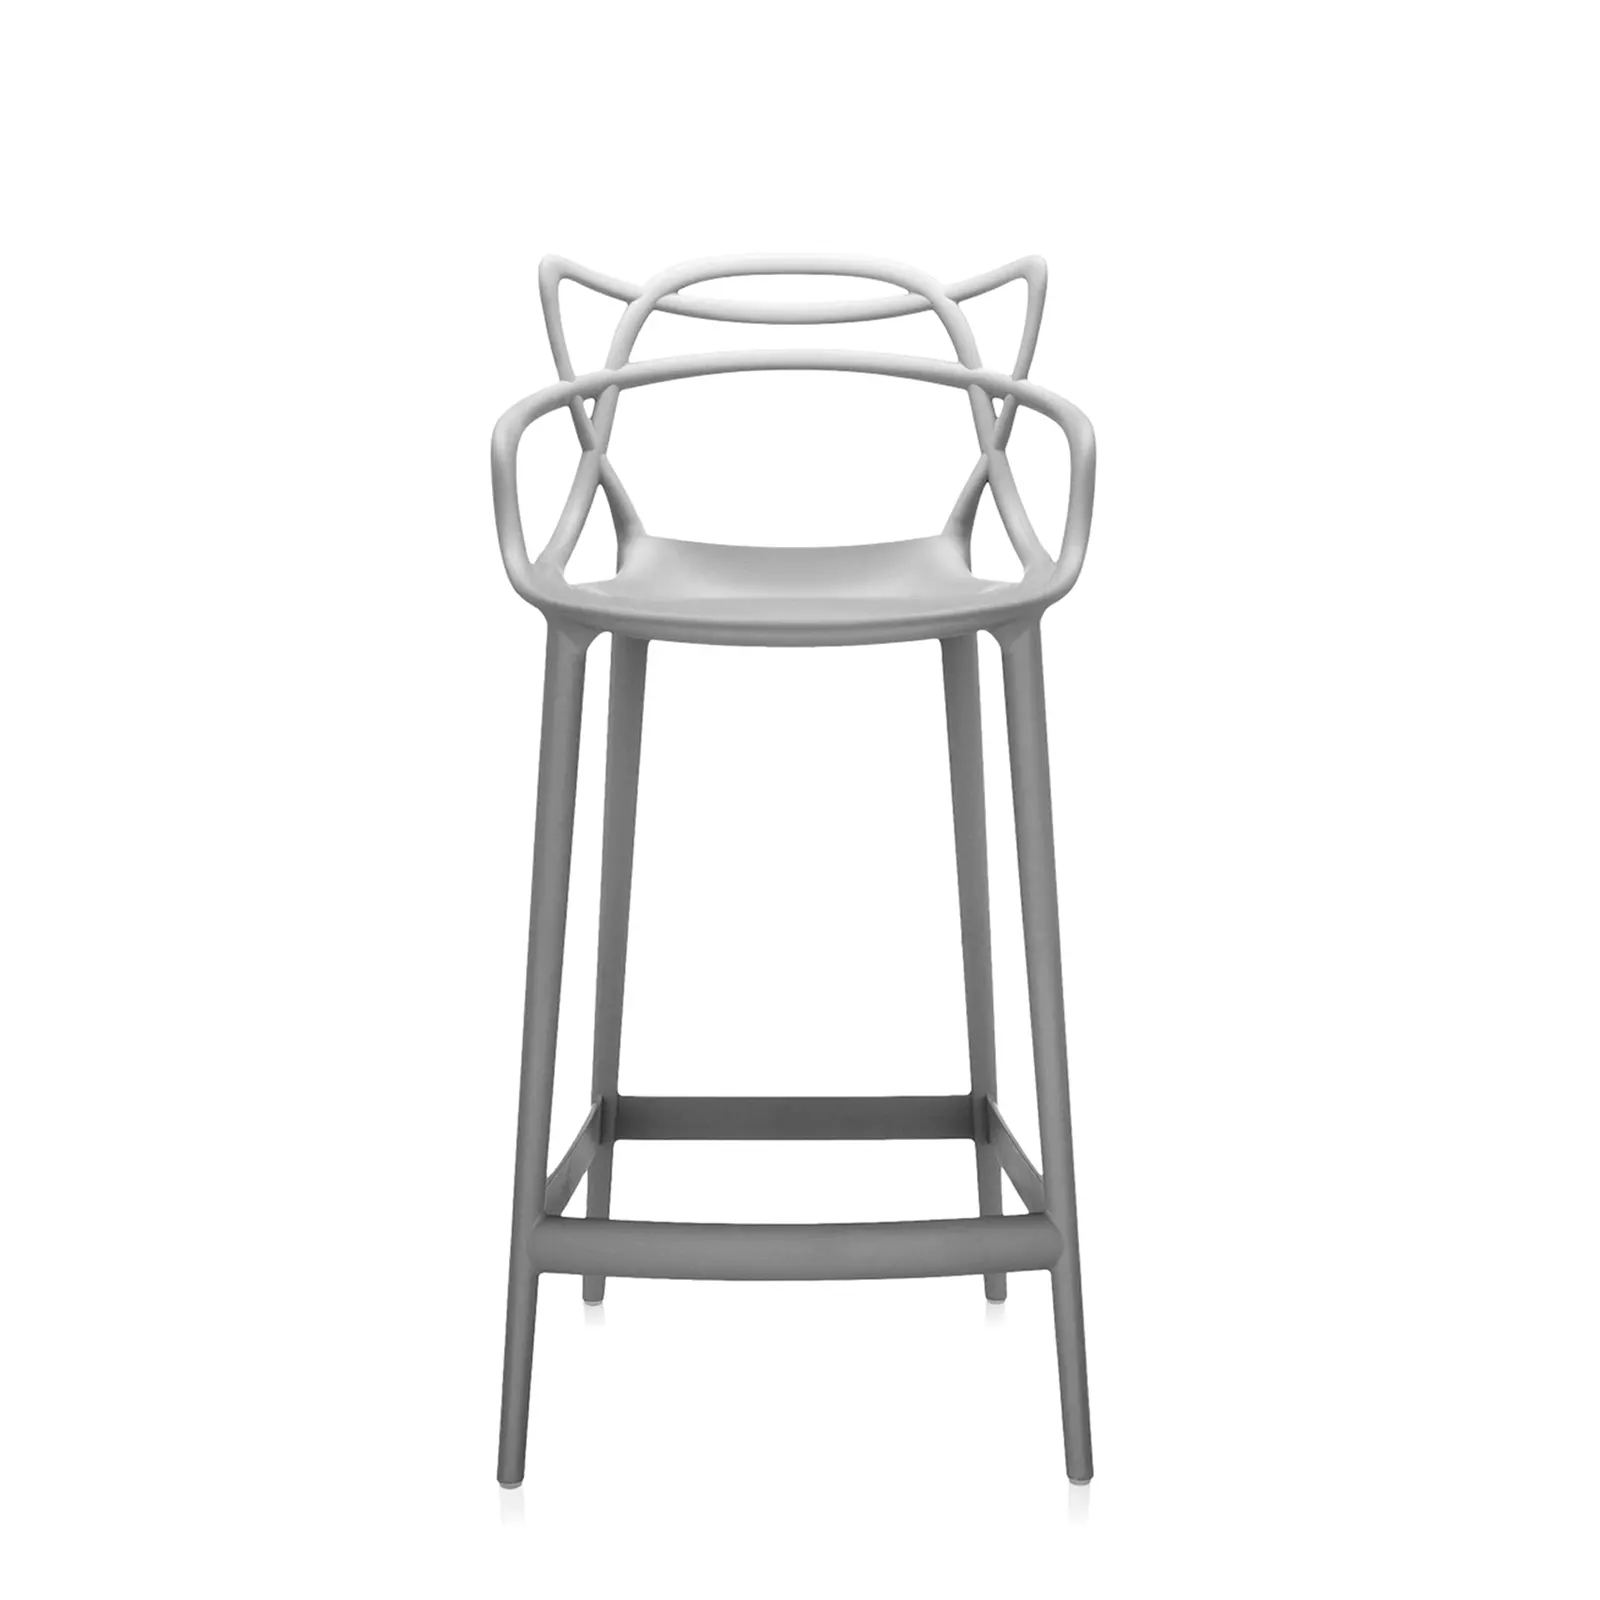 MASTERS STOOL H.75 COLOR GRIS 05868/07